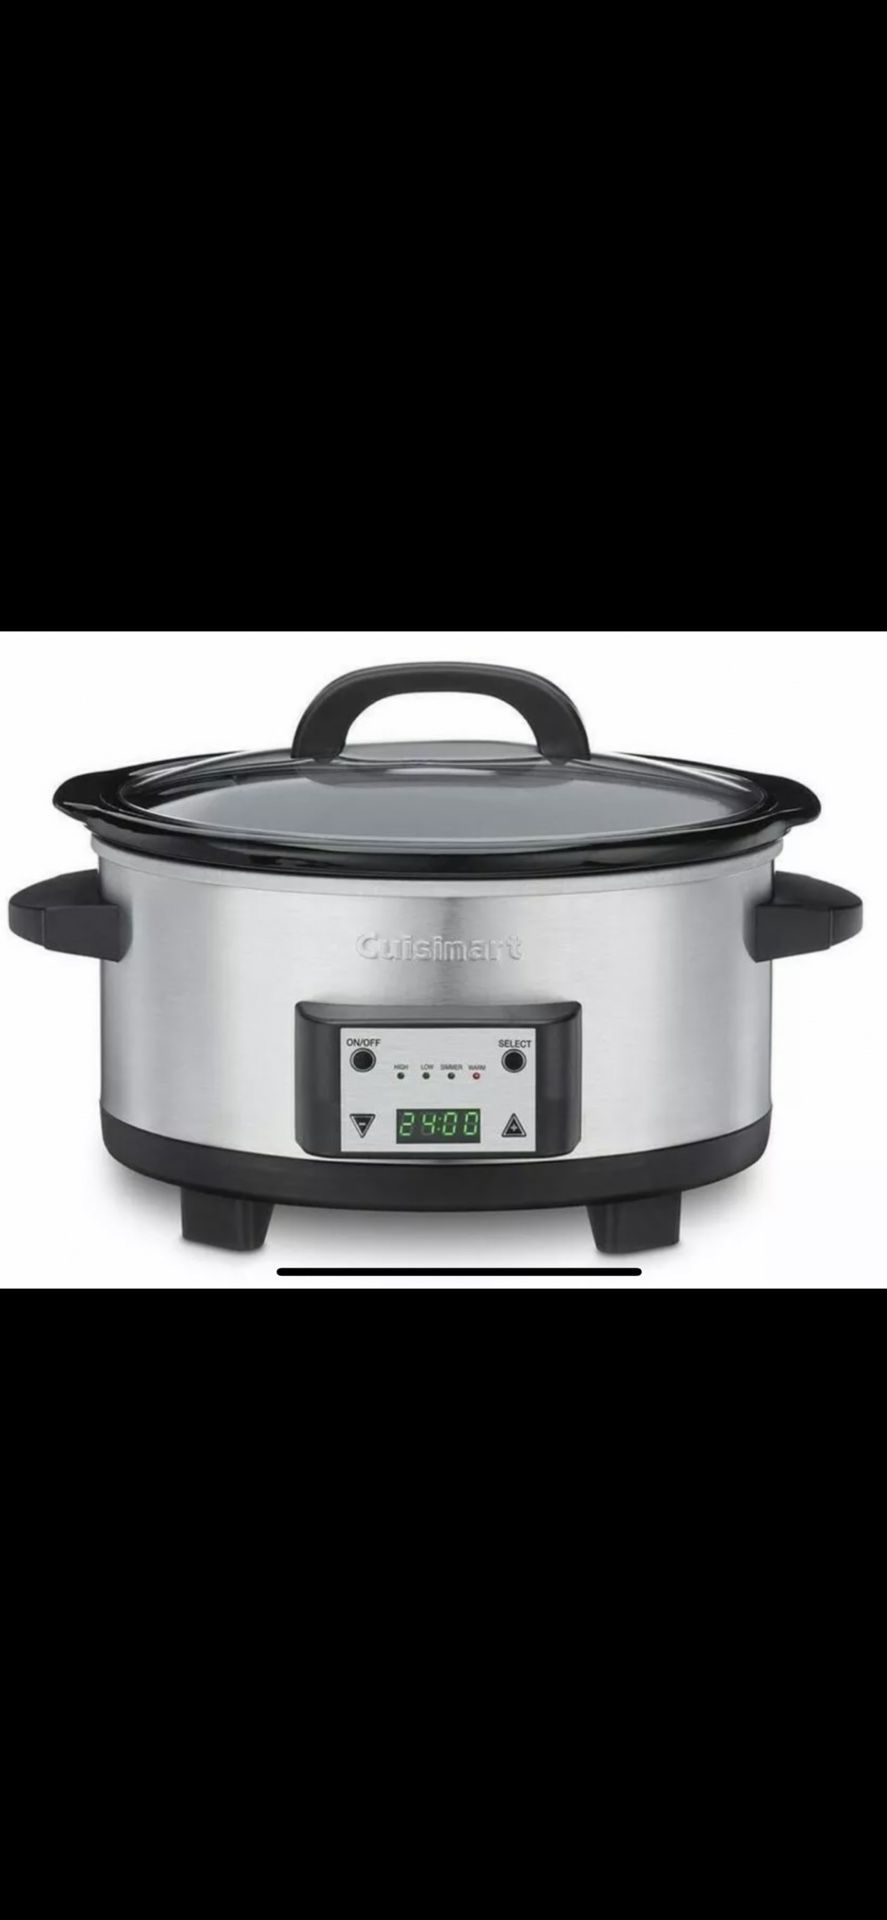 The Cuisinart 6.5-Quart Programmable Slow Cooker for Sale in West